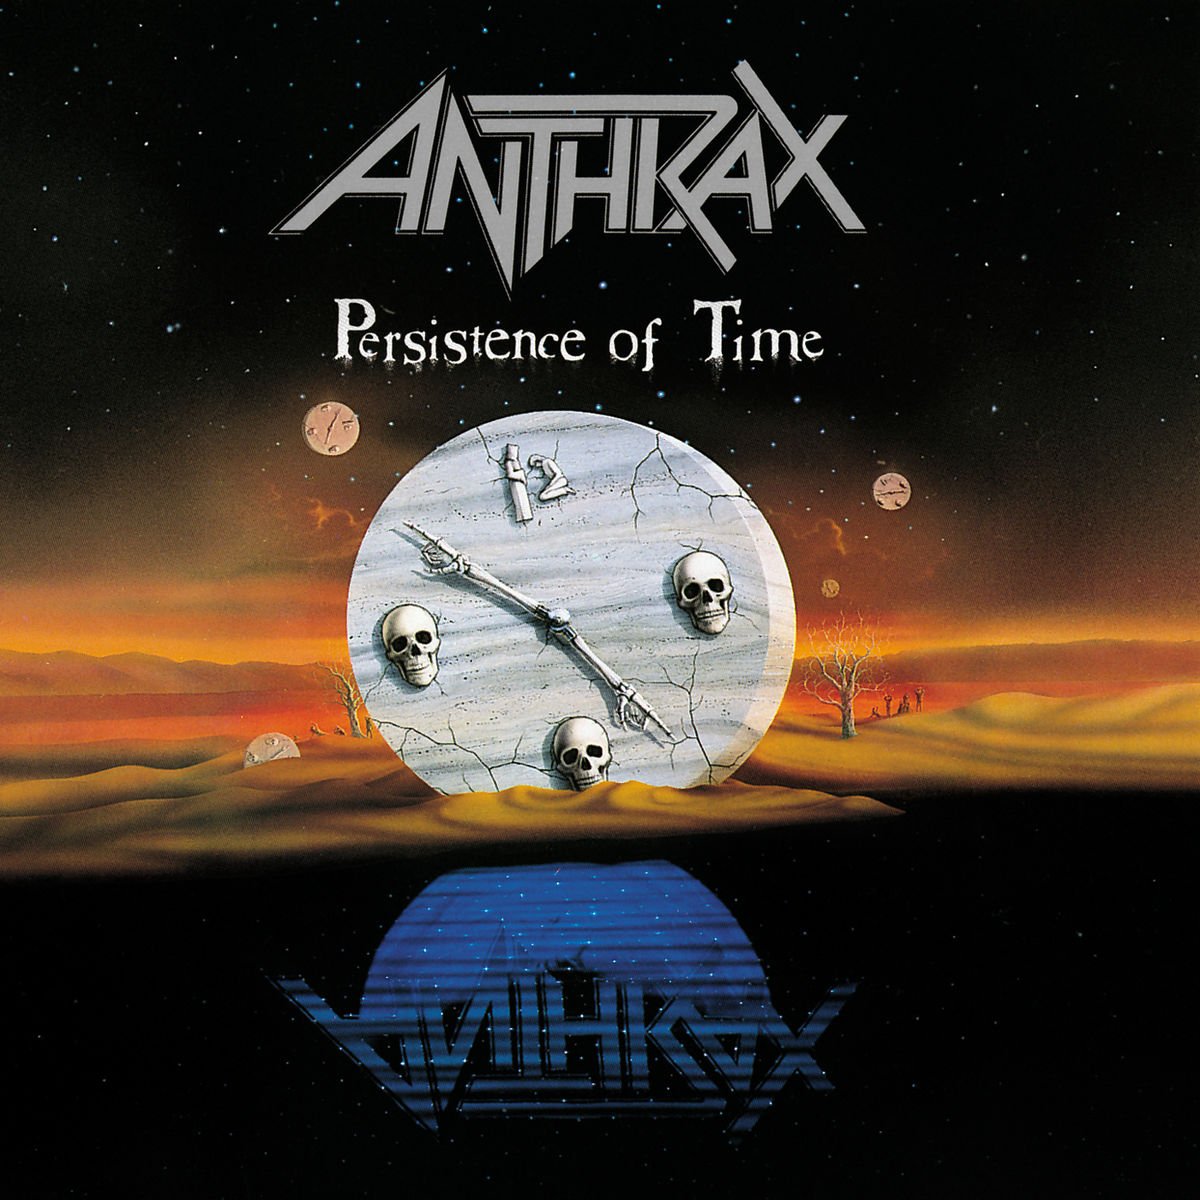 Anthrax-persistence-of-time.jpg